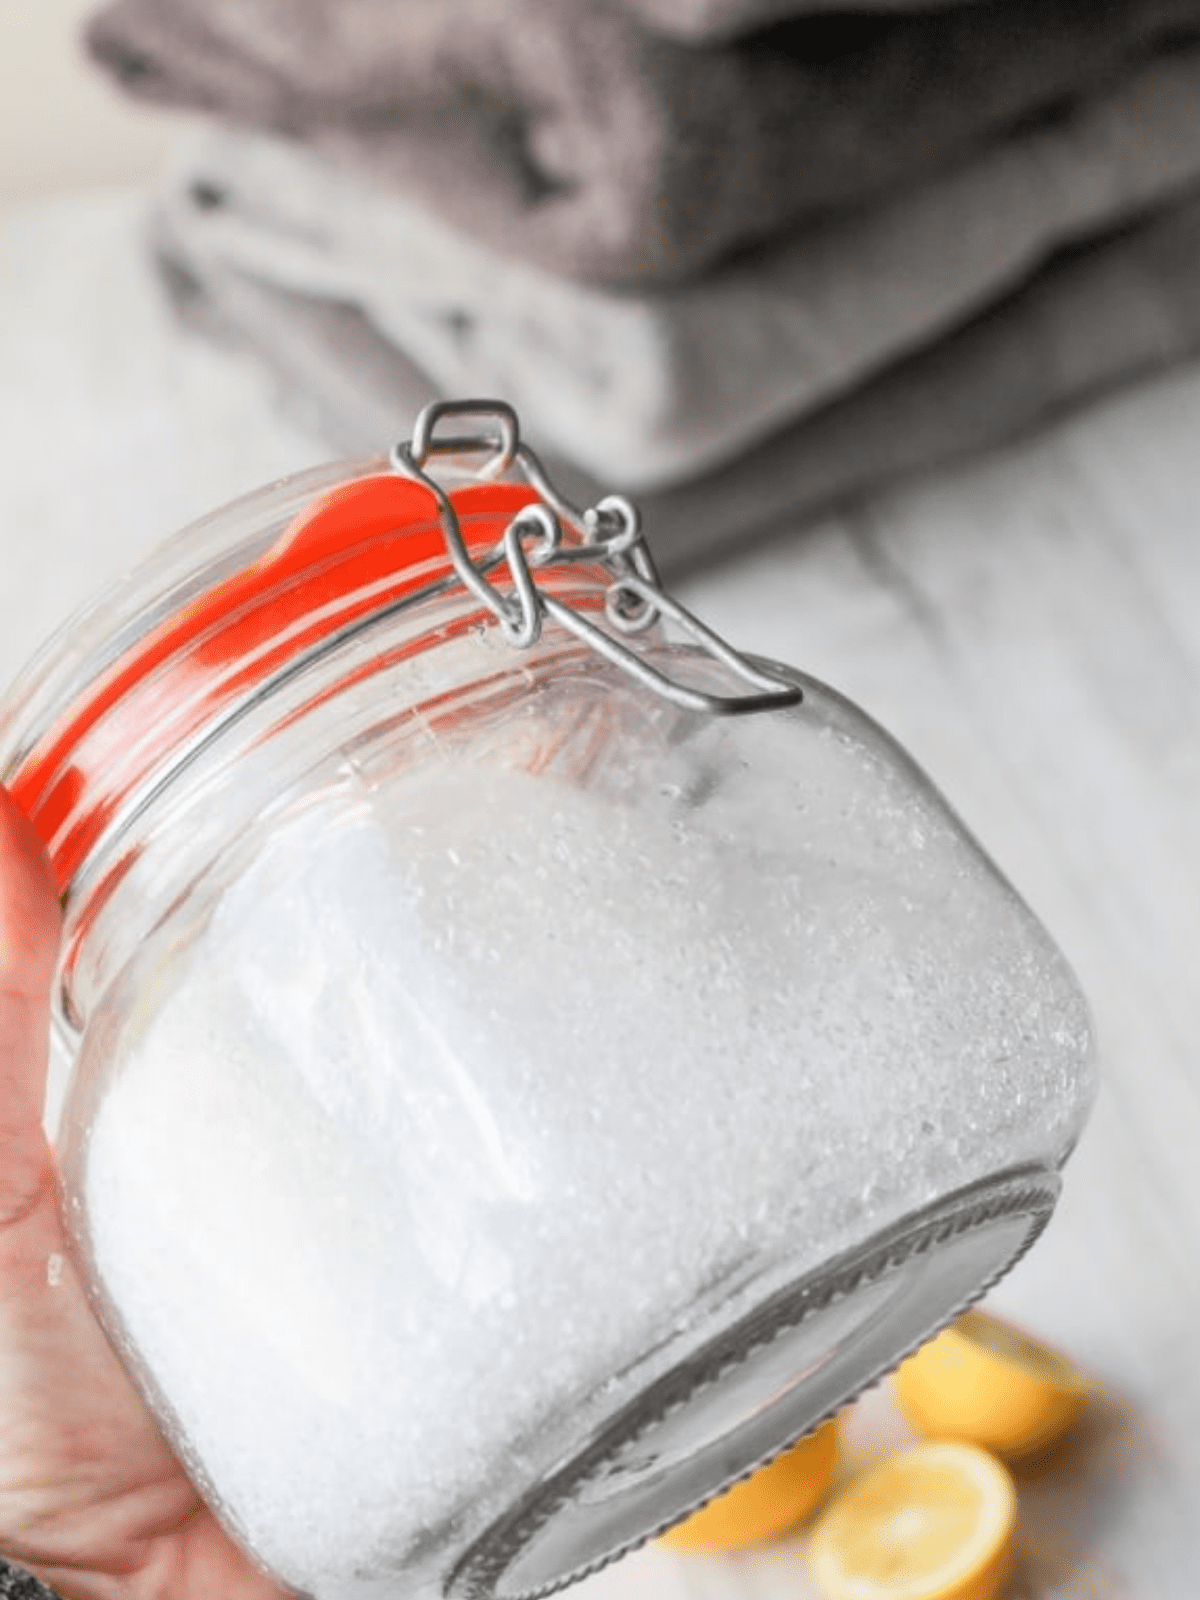 This Homemade Epsom Salts Bath Crystals recipe is an all natural and effective homemade stress relief therapy